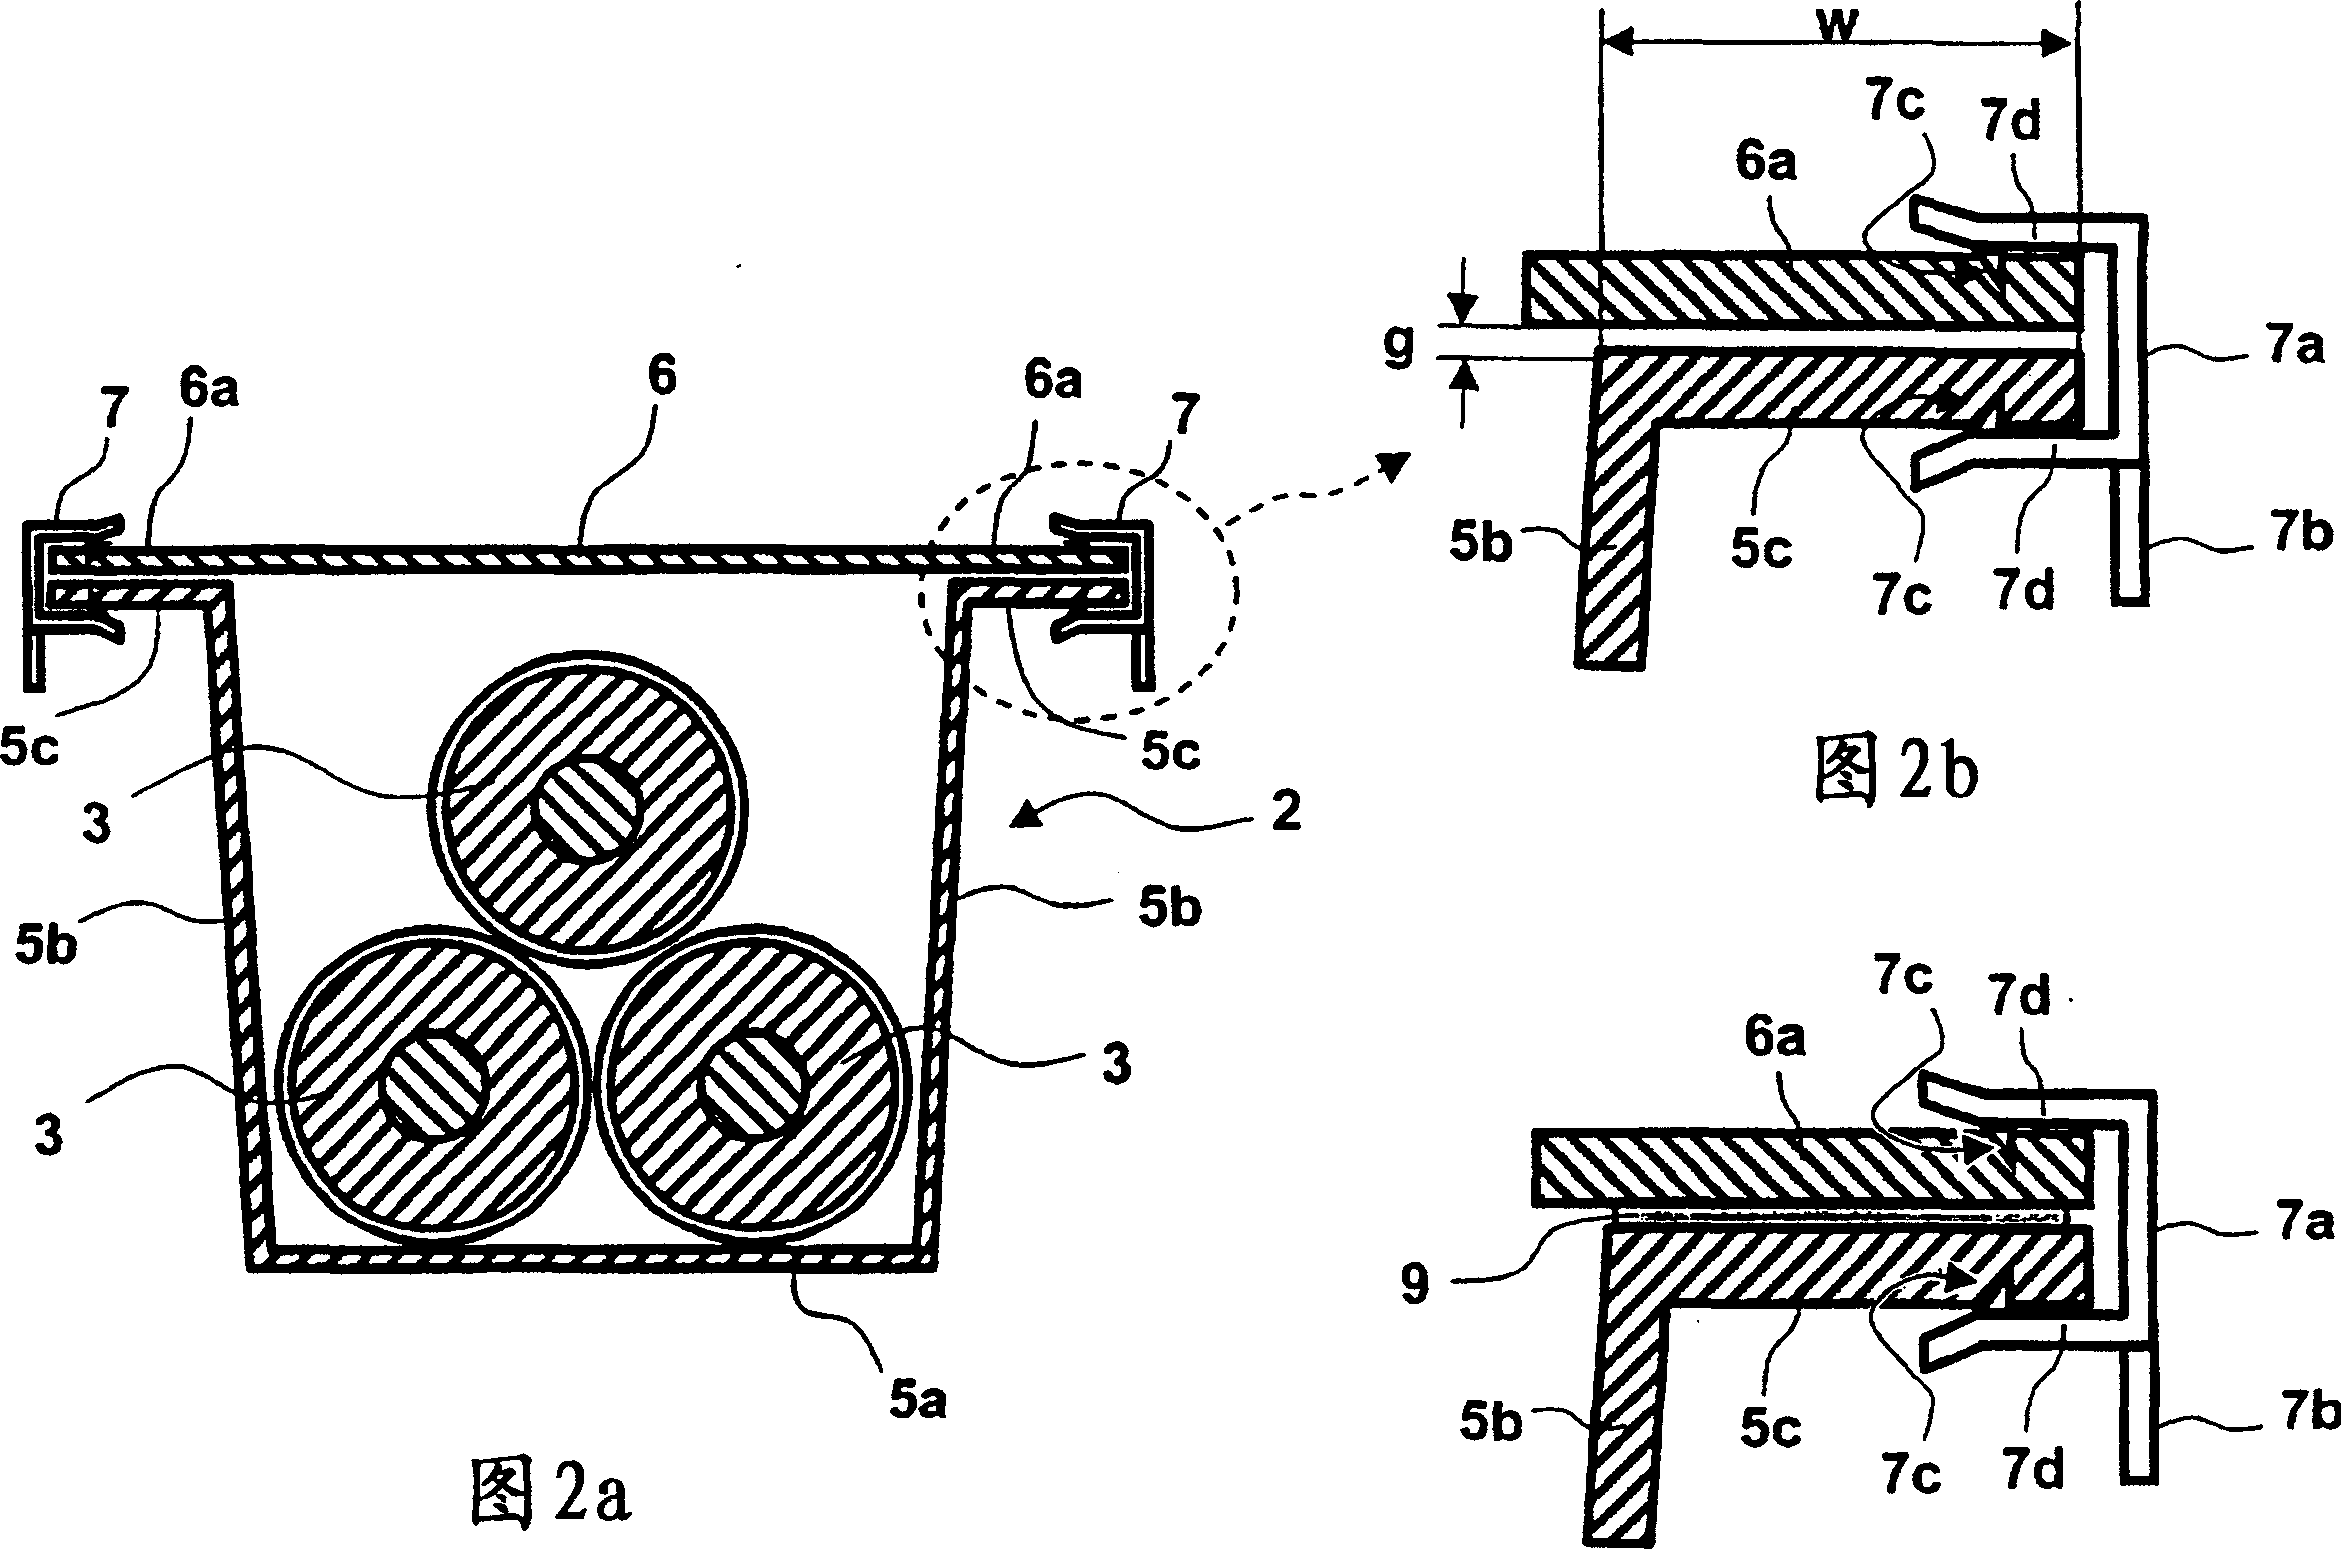 Method for screening magnetic field generated by electrical power transmission line and electrical power transmission line so screened